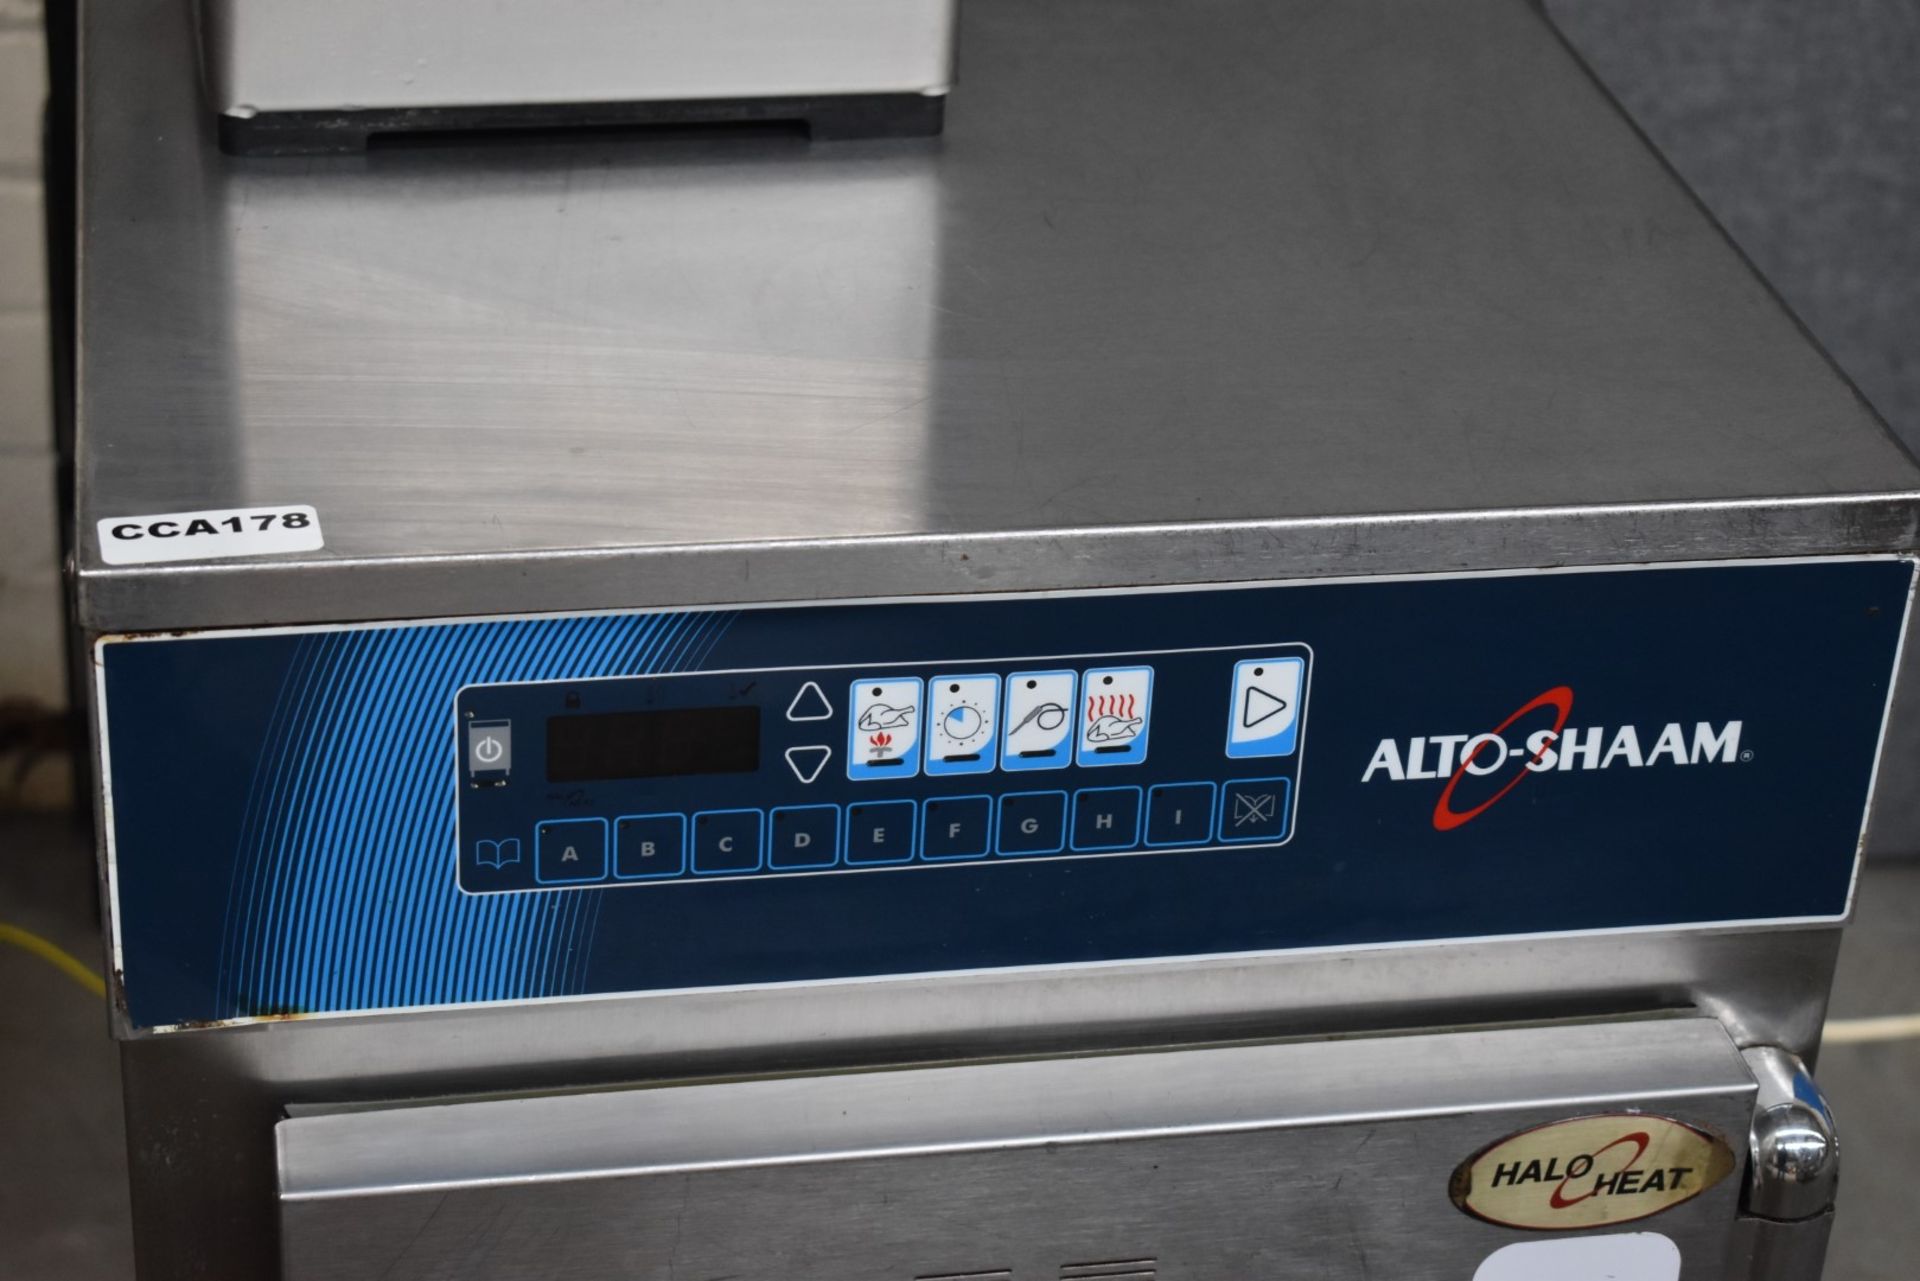 1 x Alto-Shaam Electronic 18kg Cook & Hold Oven - RRP £9,200 - Dimensions: H85 x W46 x D67 cms - - Image 3 of 12